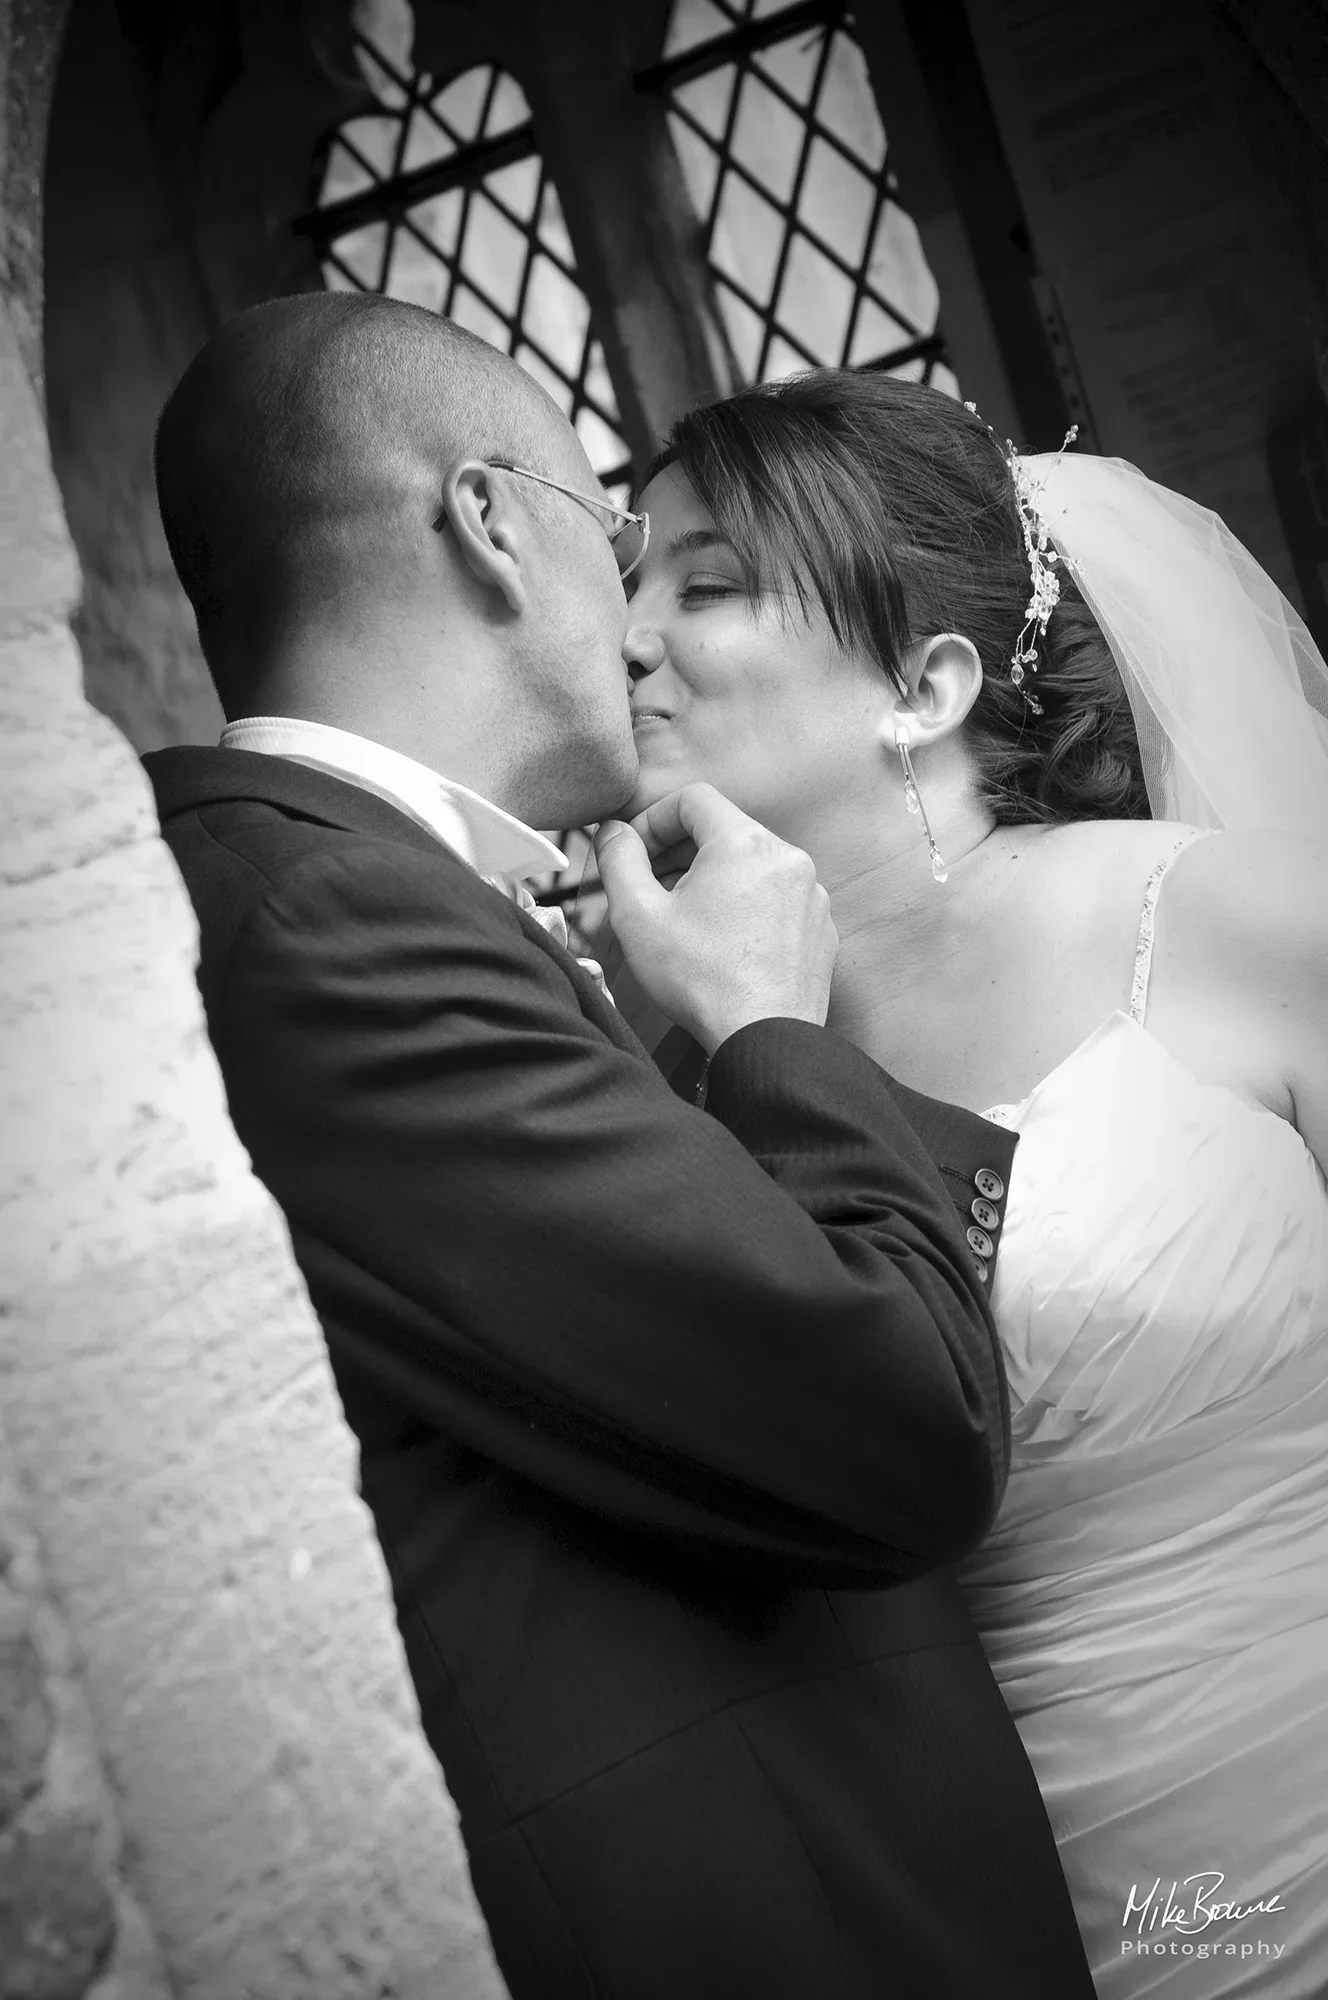 Man in a morning suit caressing the face of a woman wearing a wedding dress as he kisses her on the lips